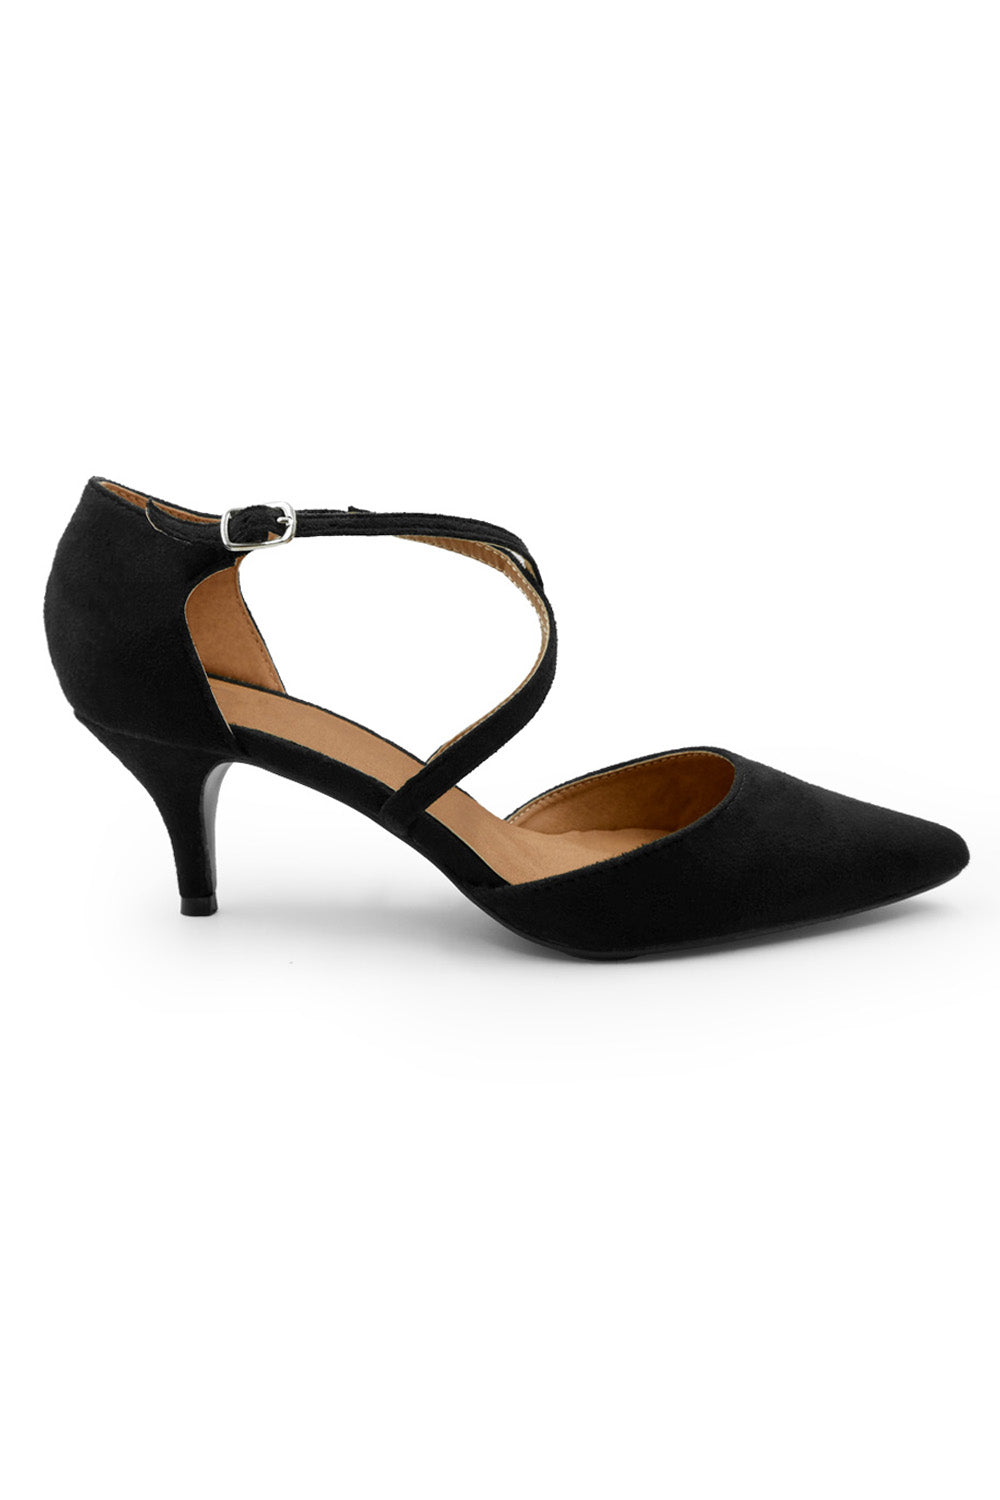 KENNEDI LOW KITTEN HEEL WITH CROSSOVER STRAP IN BLACK SUEDE – Where's ...